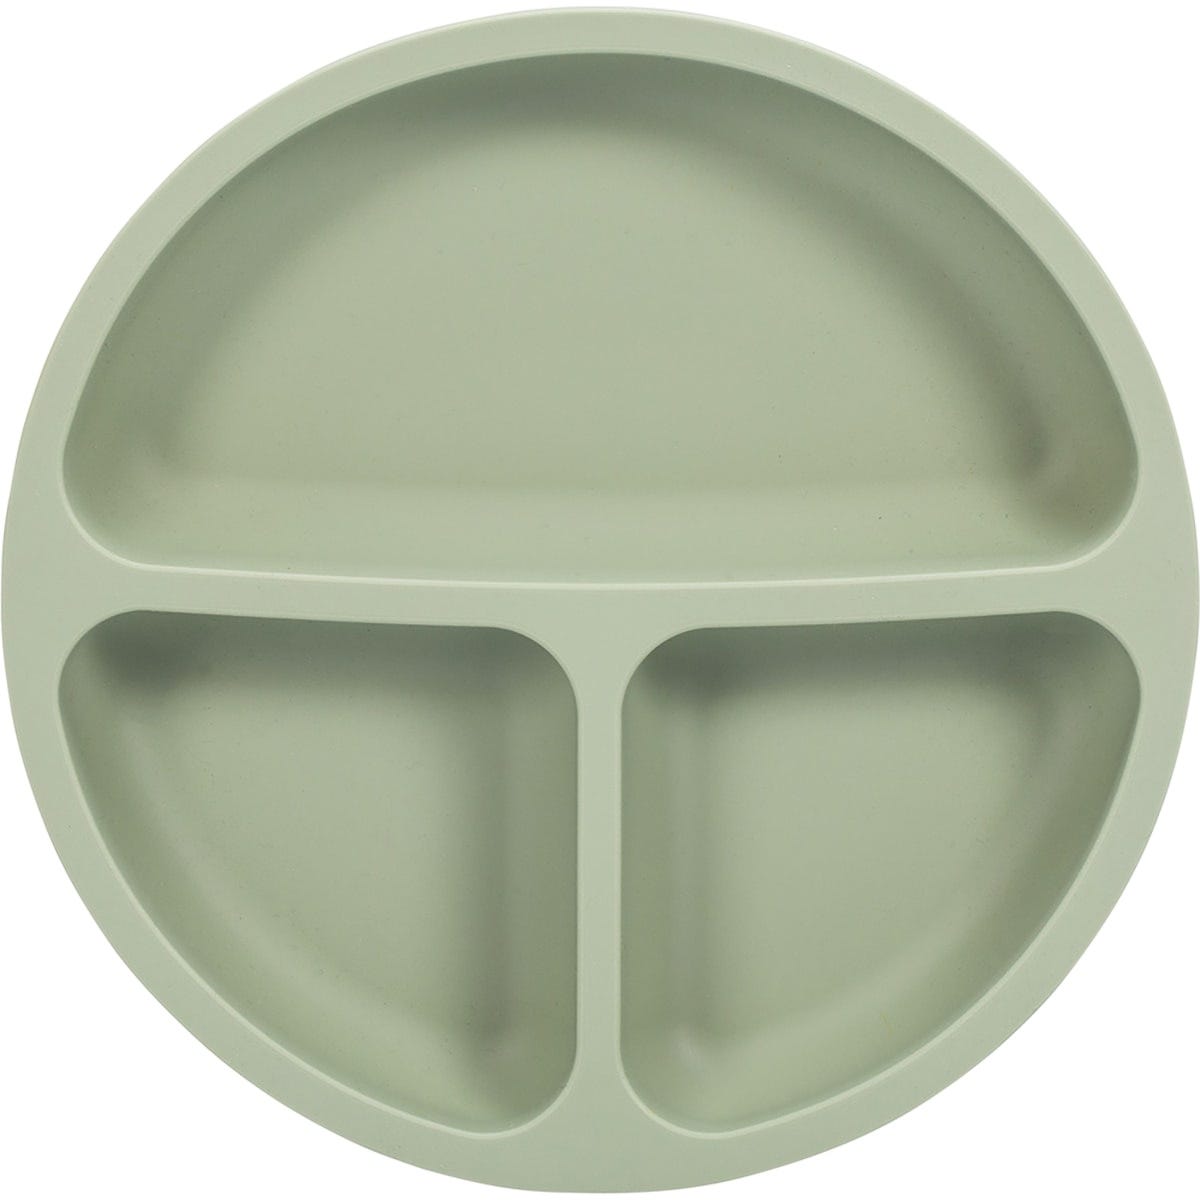 Little Mashies Silicone Sucky Platter Plate Olive